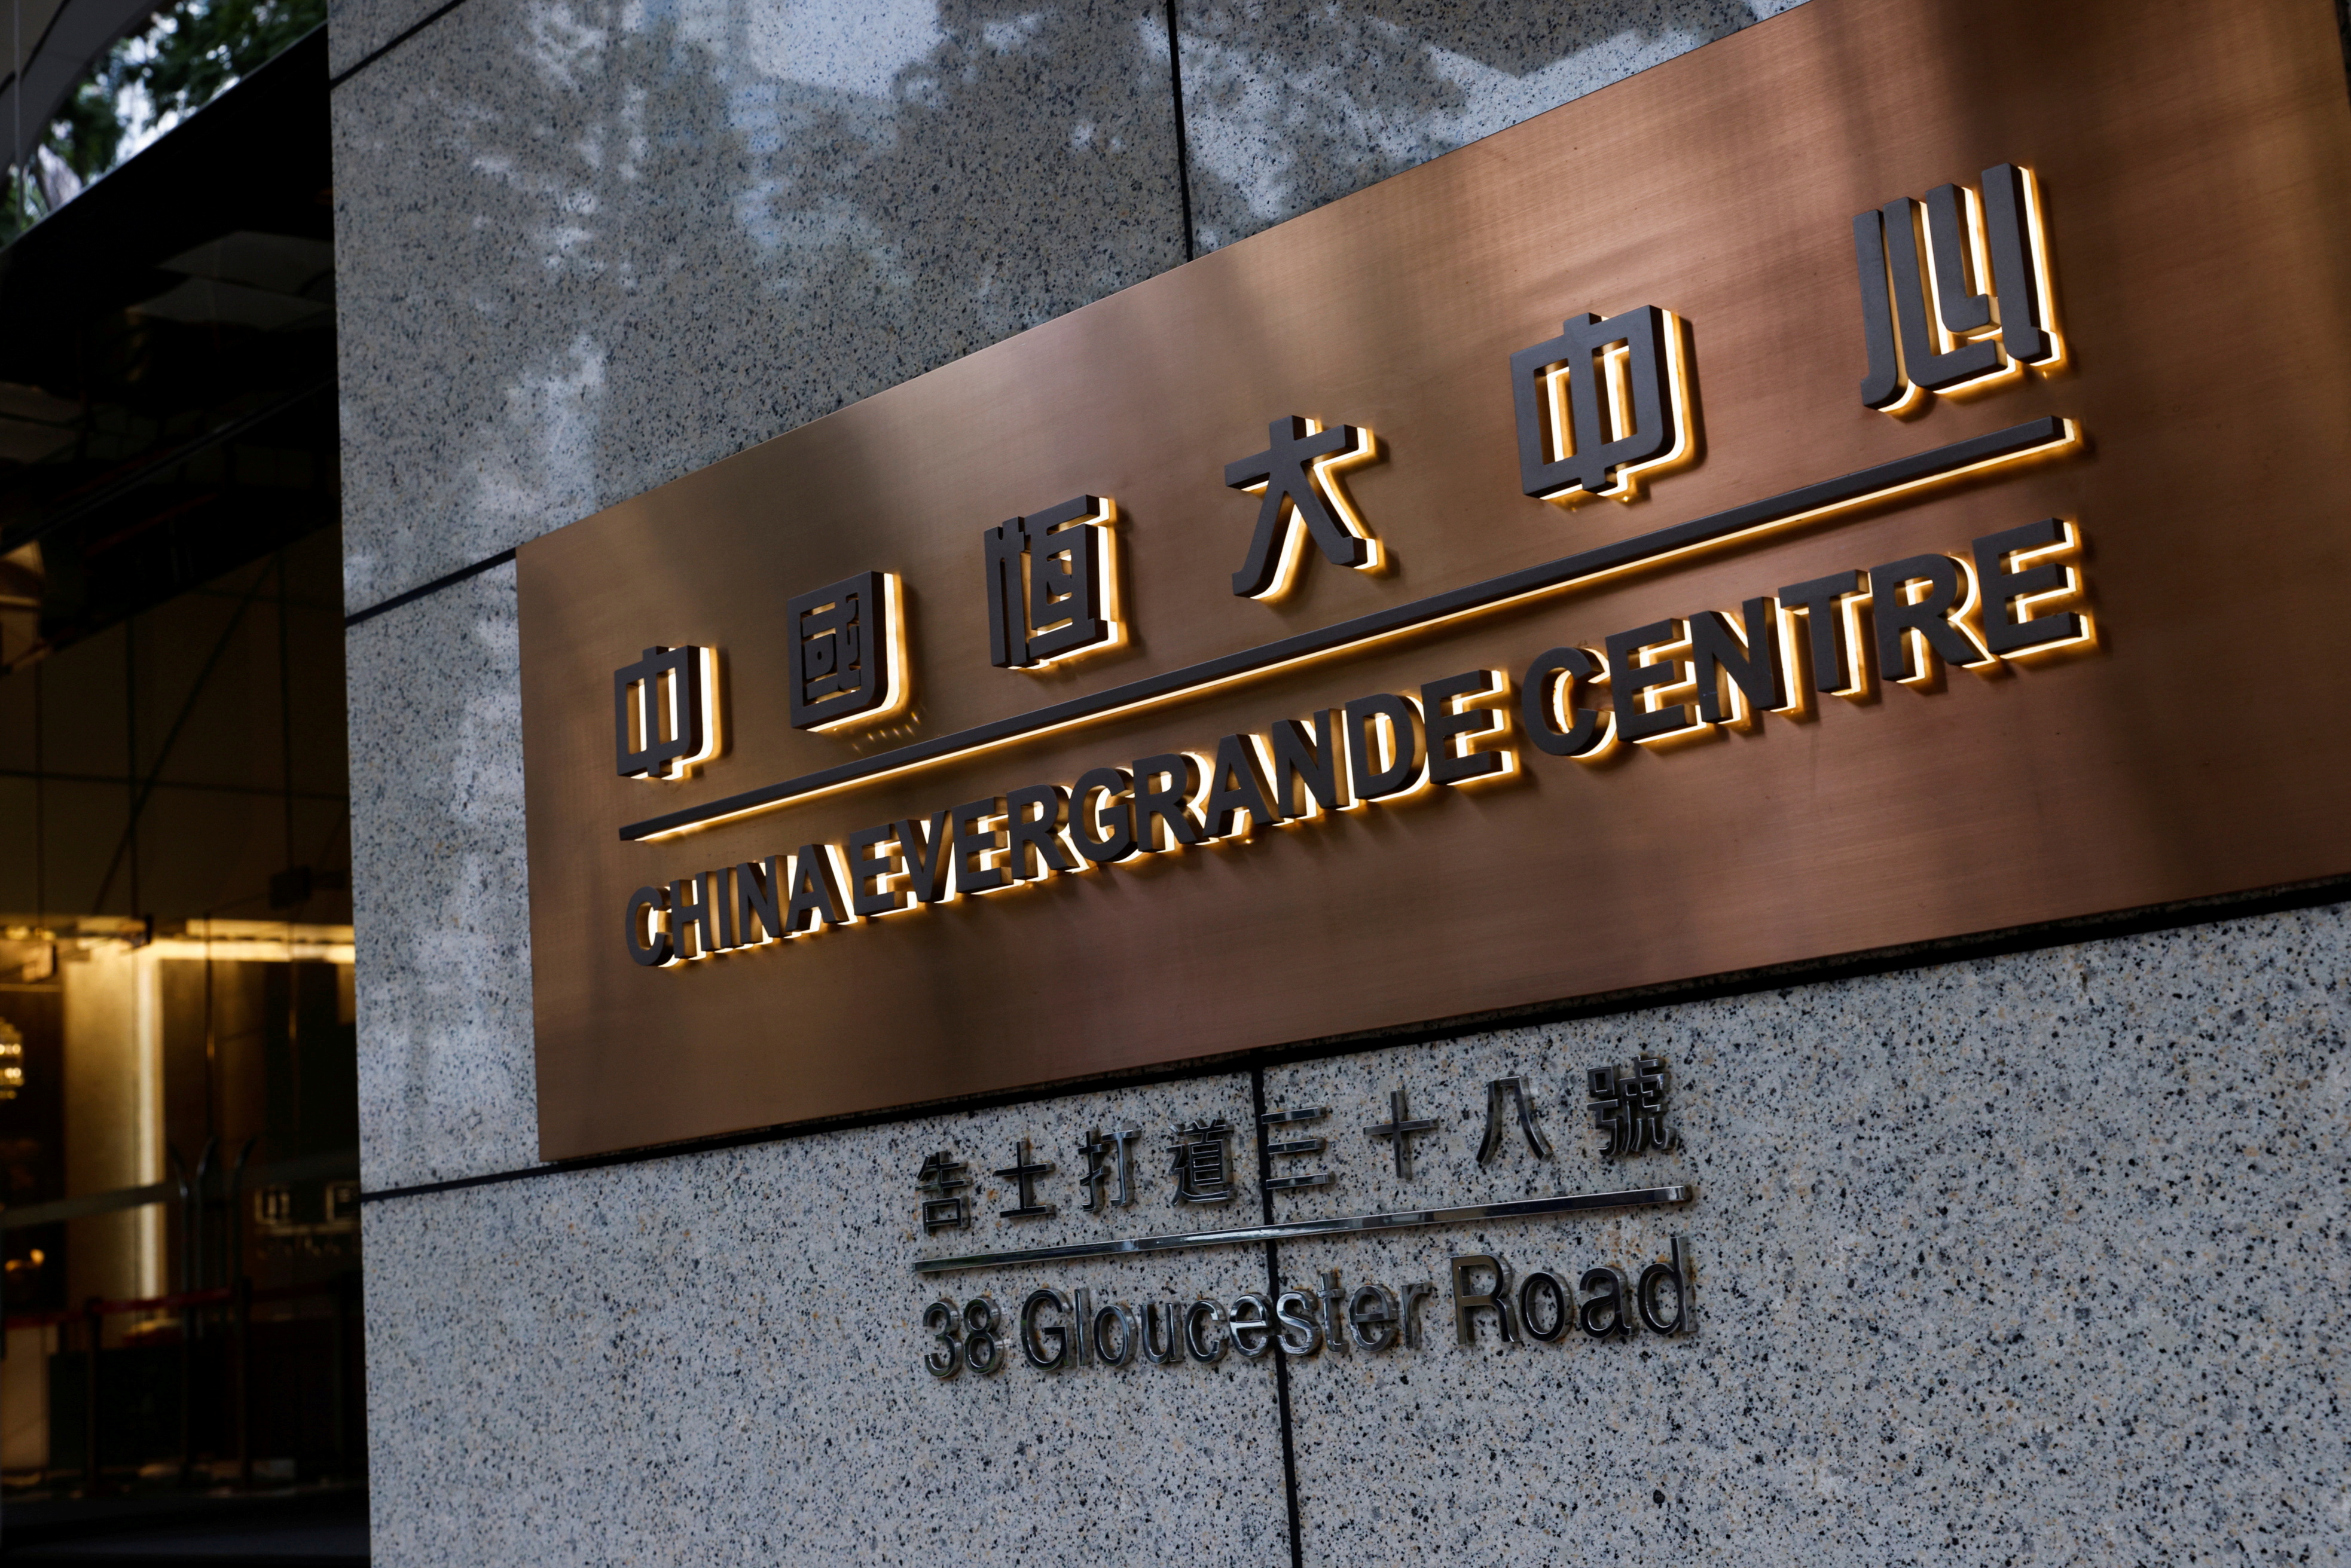 FILE PHOTO: The China Evergrande Centre building sign is seen in Hong Kong, China. August 25, 2021. REUTERS/Tyrone Siu/File Photo